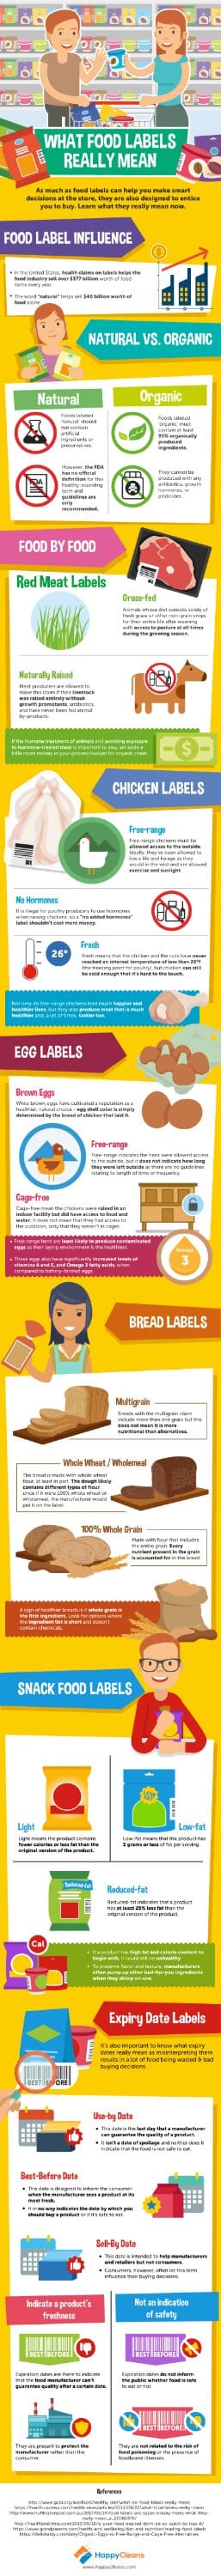 What-Food-Labels-Really-Mean785280966.Jpg